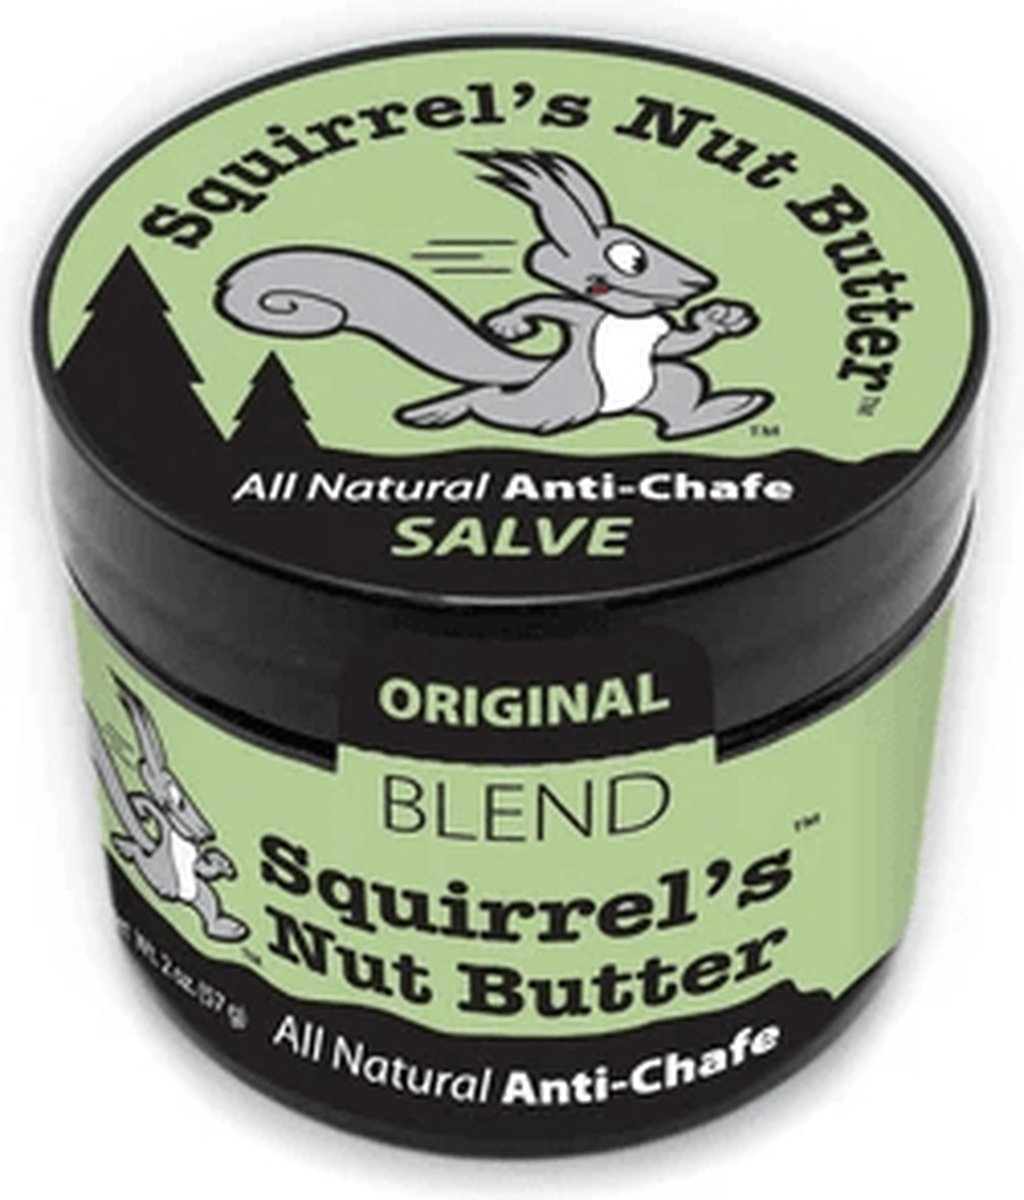 Squirrel's Nut Butter Anti-Chafe Tub (2.0 ounce / 57 gram)